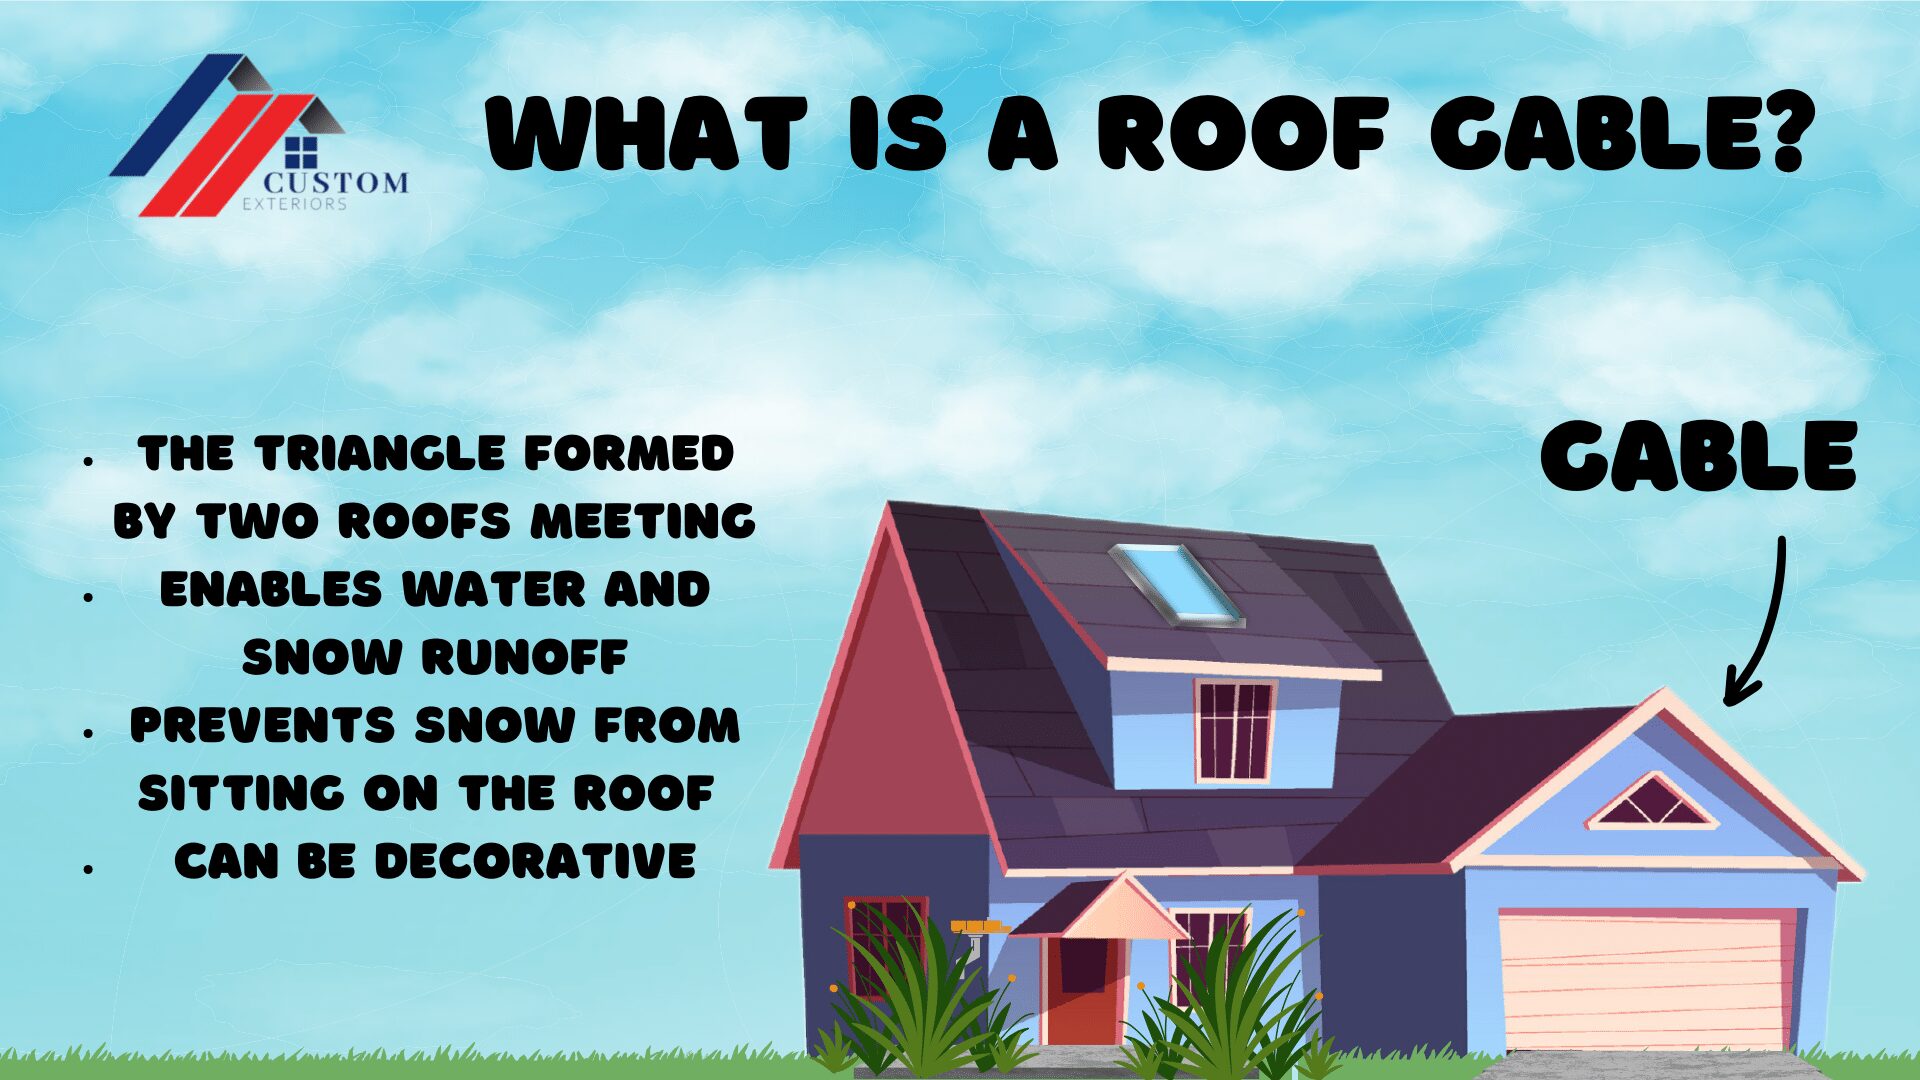 Infographic explaining what a roof gable is with illustrations and bullet points